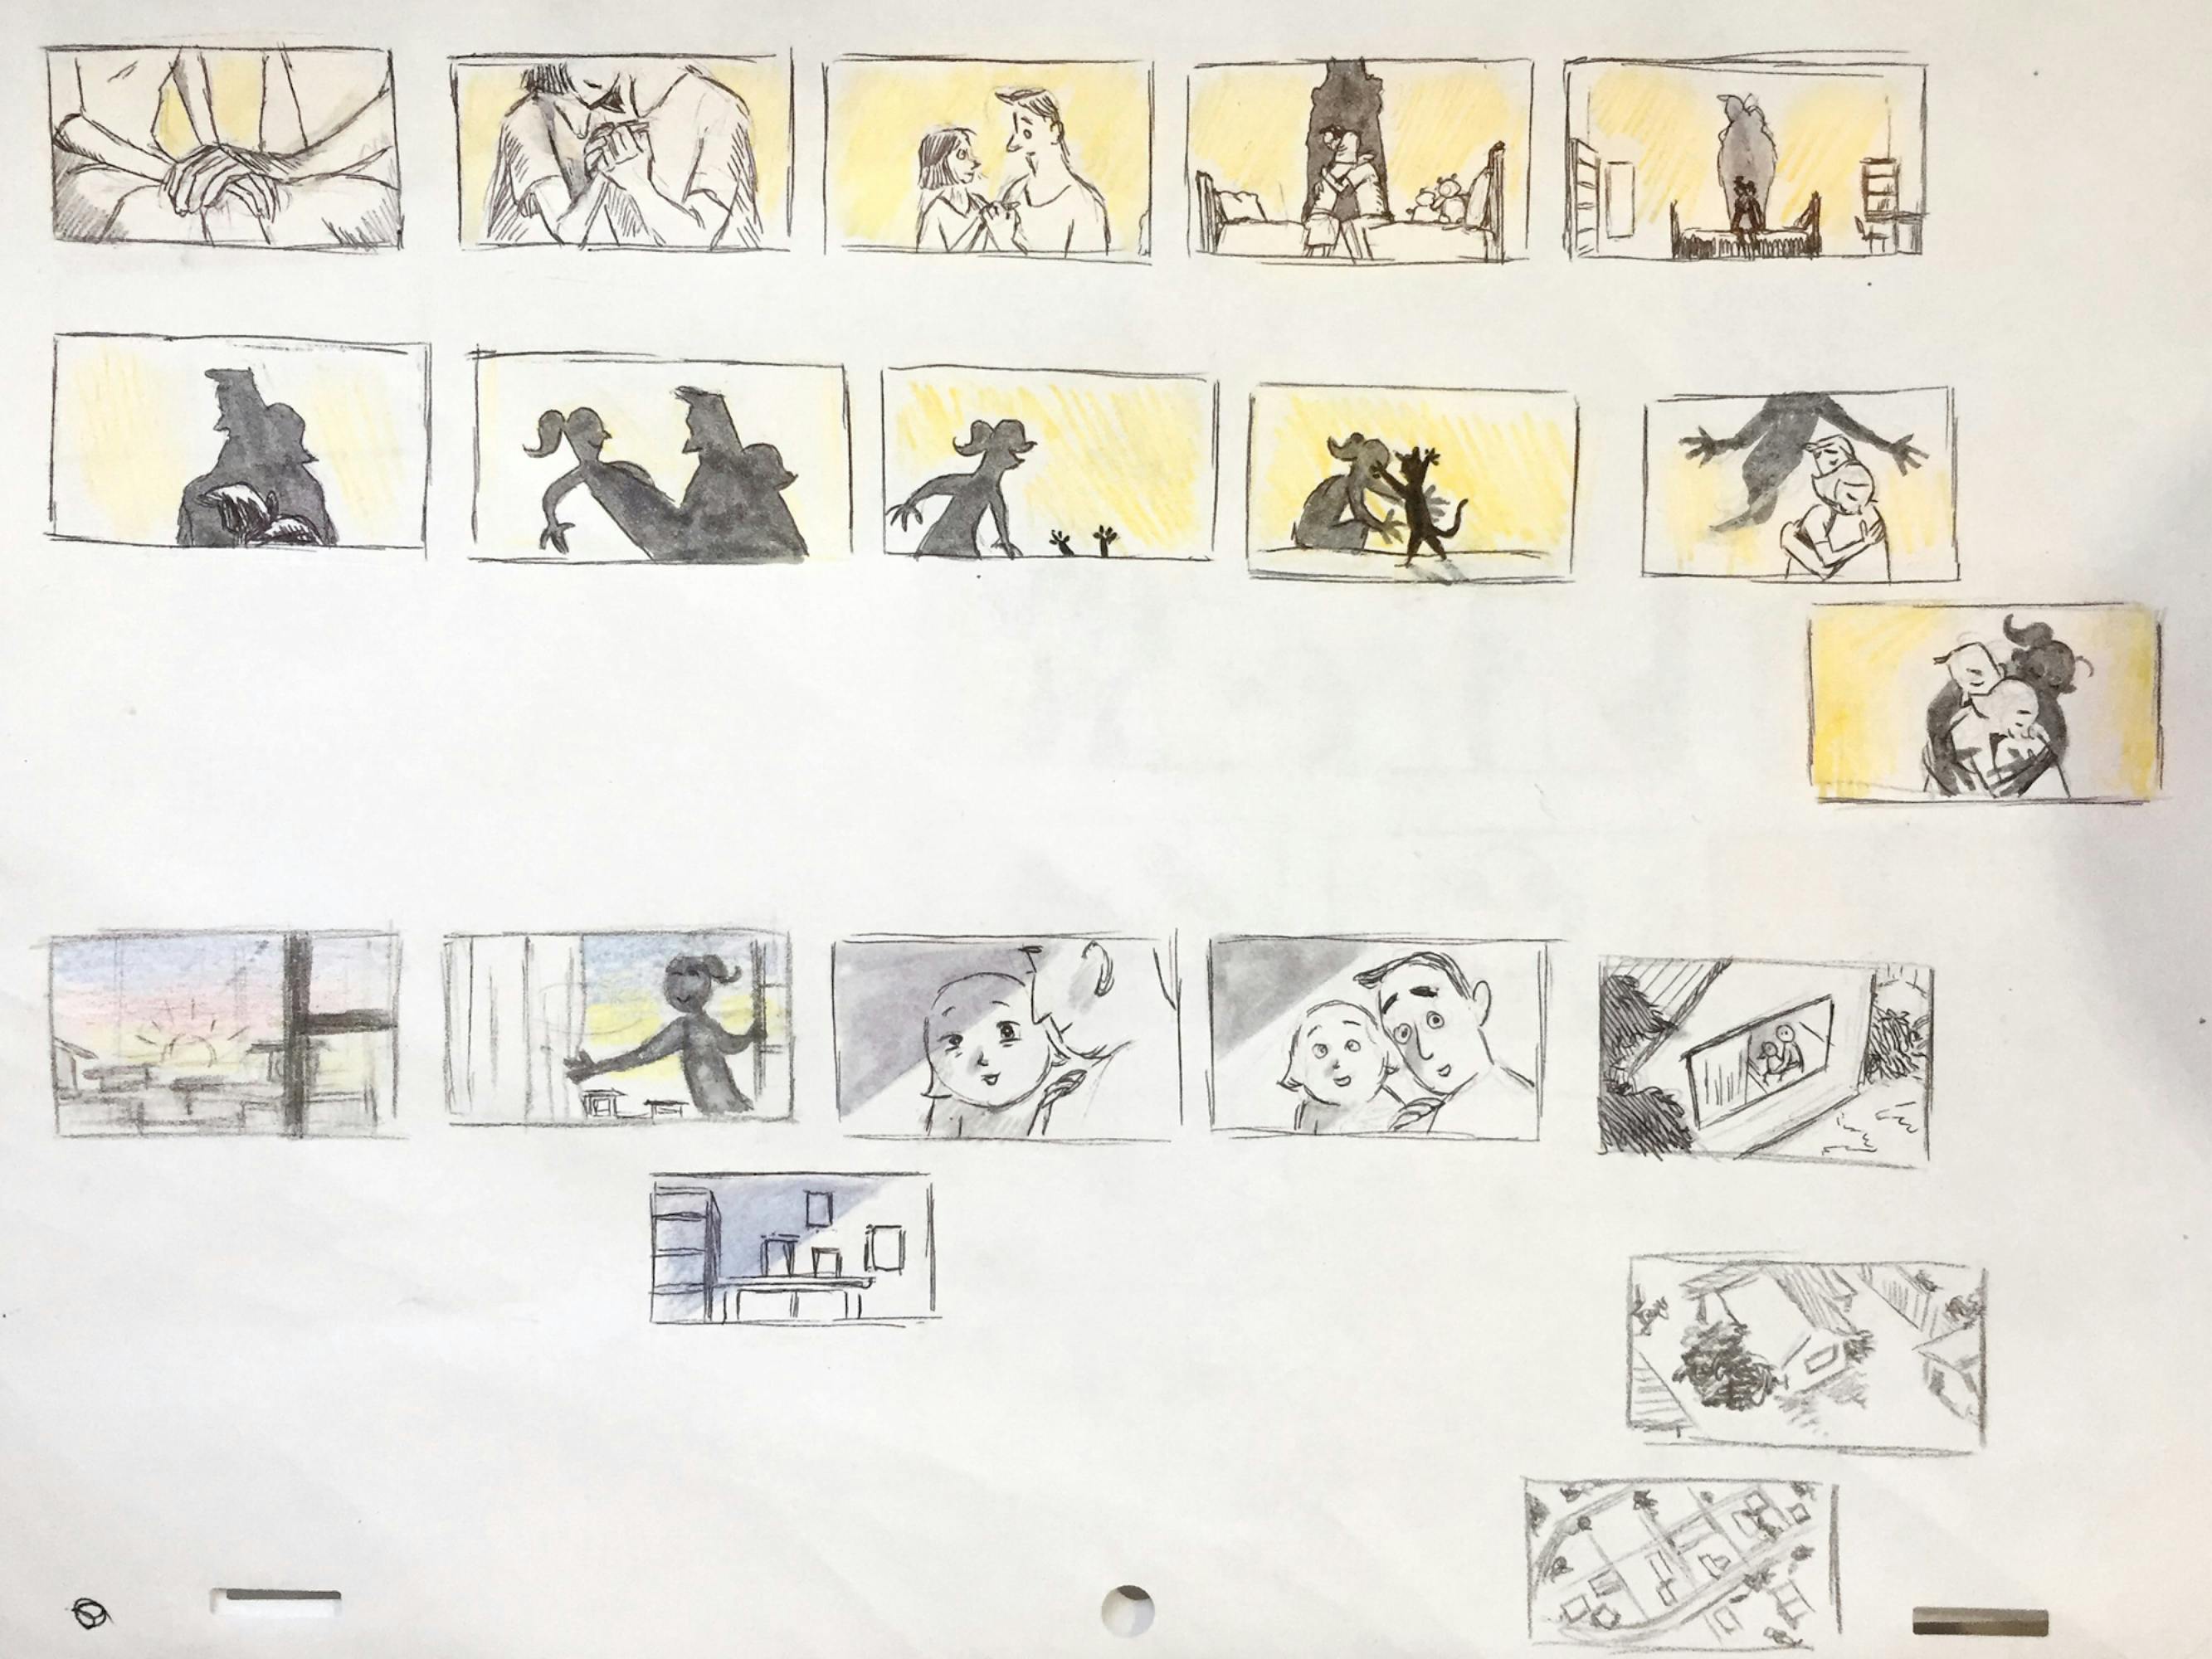 Storyboards for If Anything Happens I Love You show the emotional journey of the parents in the film as they grapple with the loss of their daughter. Their emotional state is in part represented by spectral figures who loom above the scenes.